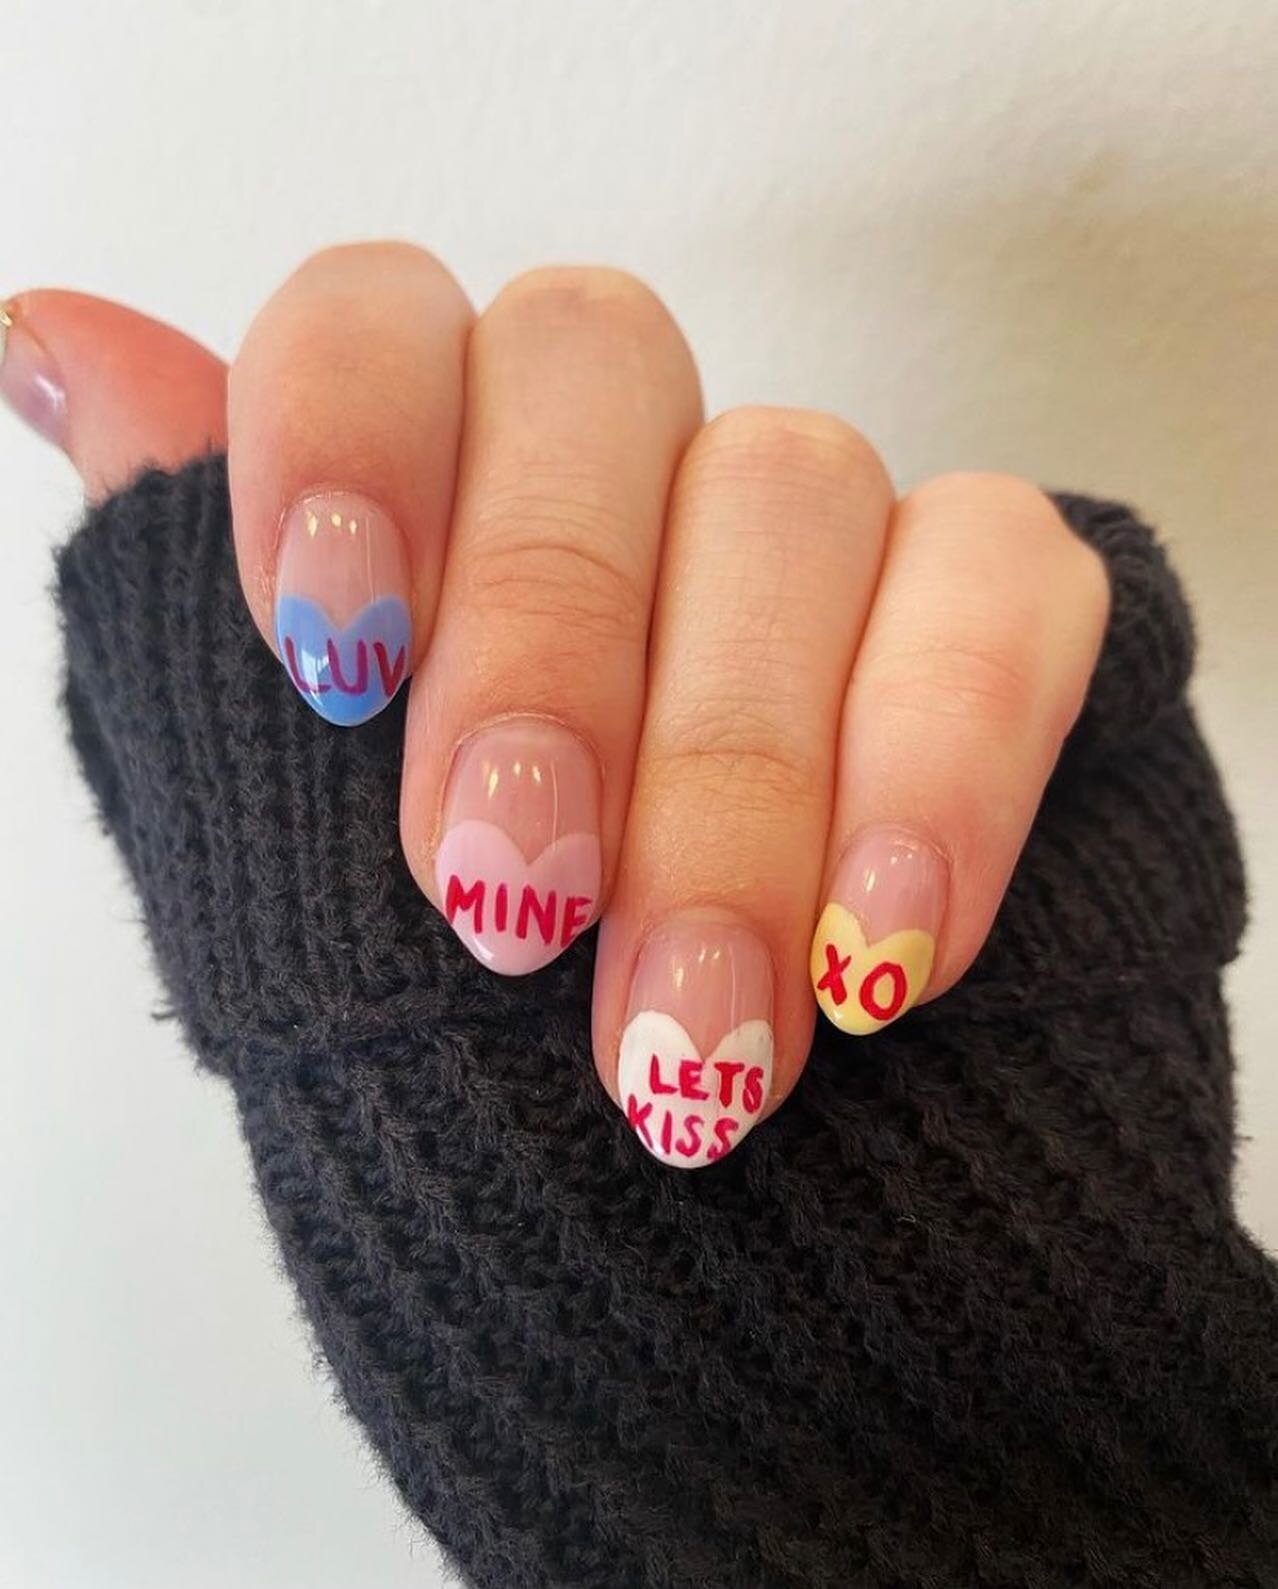 Happy Valentine&rsquo;s Day! Swipe for more lovely nail designs!!
Nails by Mattie ( @mattie.at.aniu )

#nailart #nails #nailsofinstagram #nail #gelnails #manicure #naildesign #nailsonfleek #nailstagram #nailsoftheday #naildesigns #instanails #u #nail